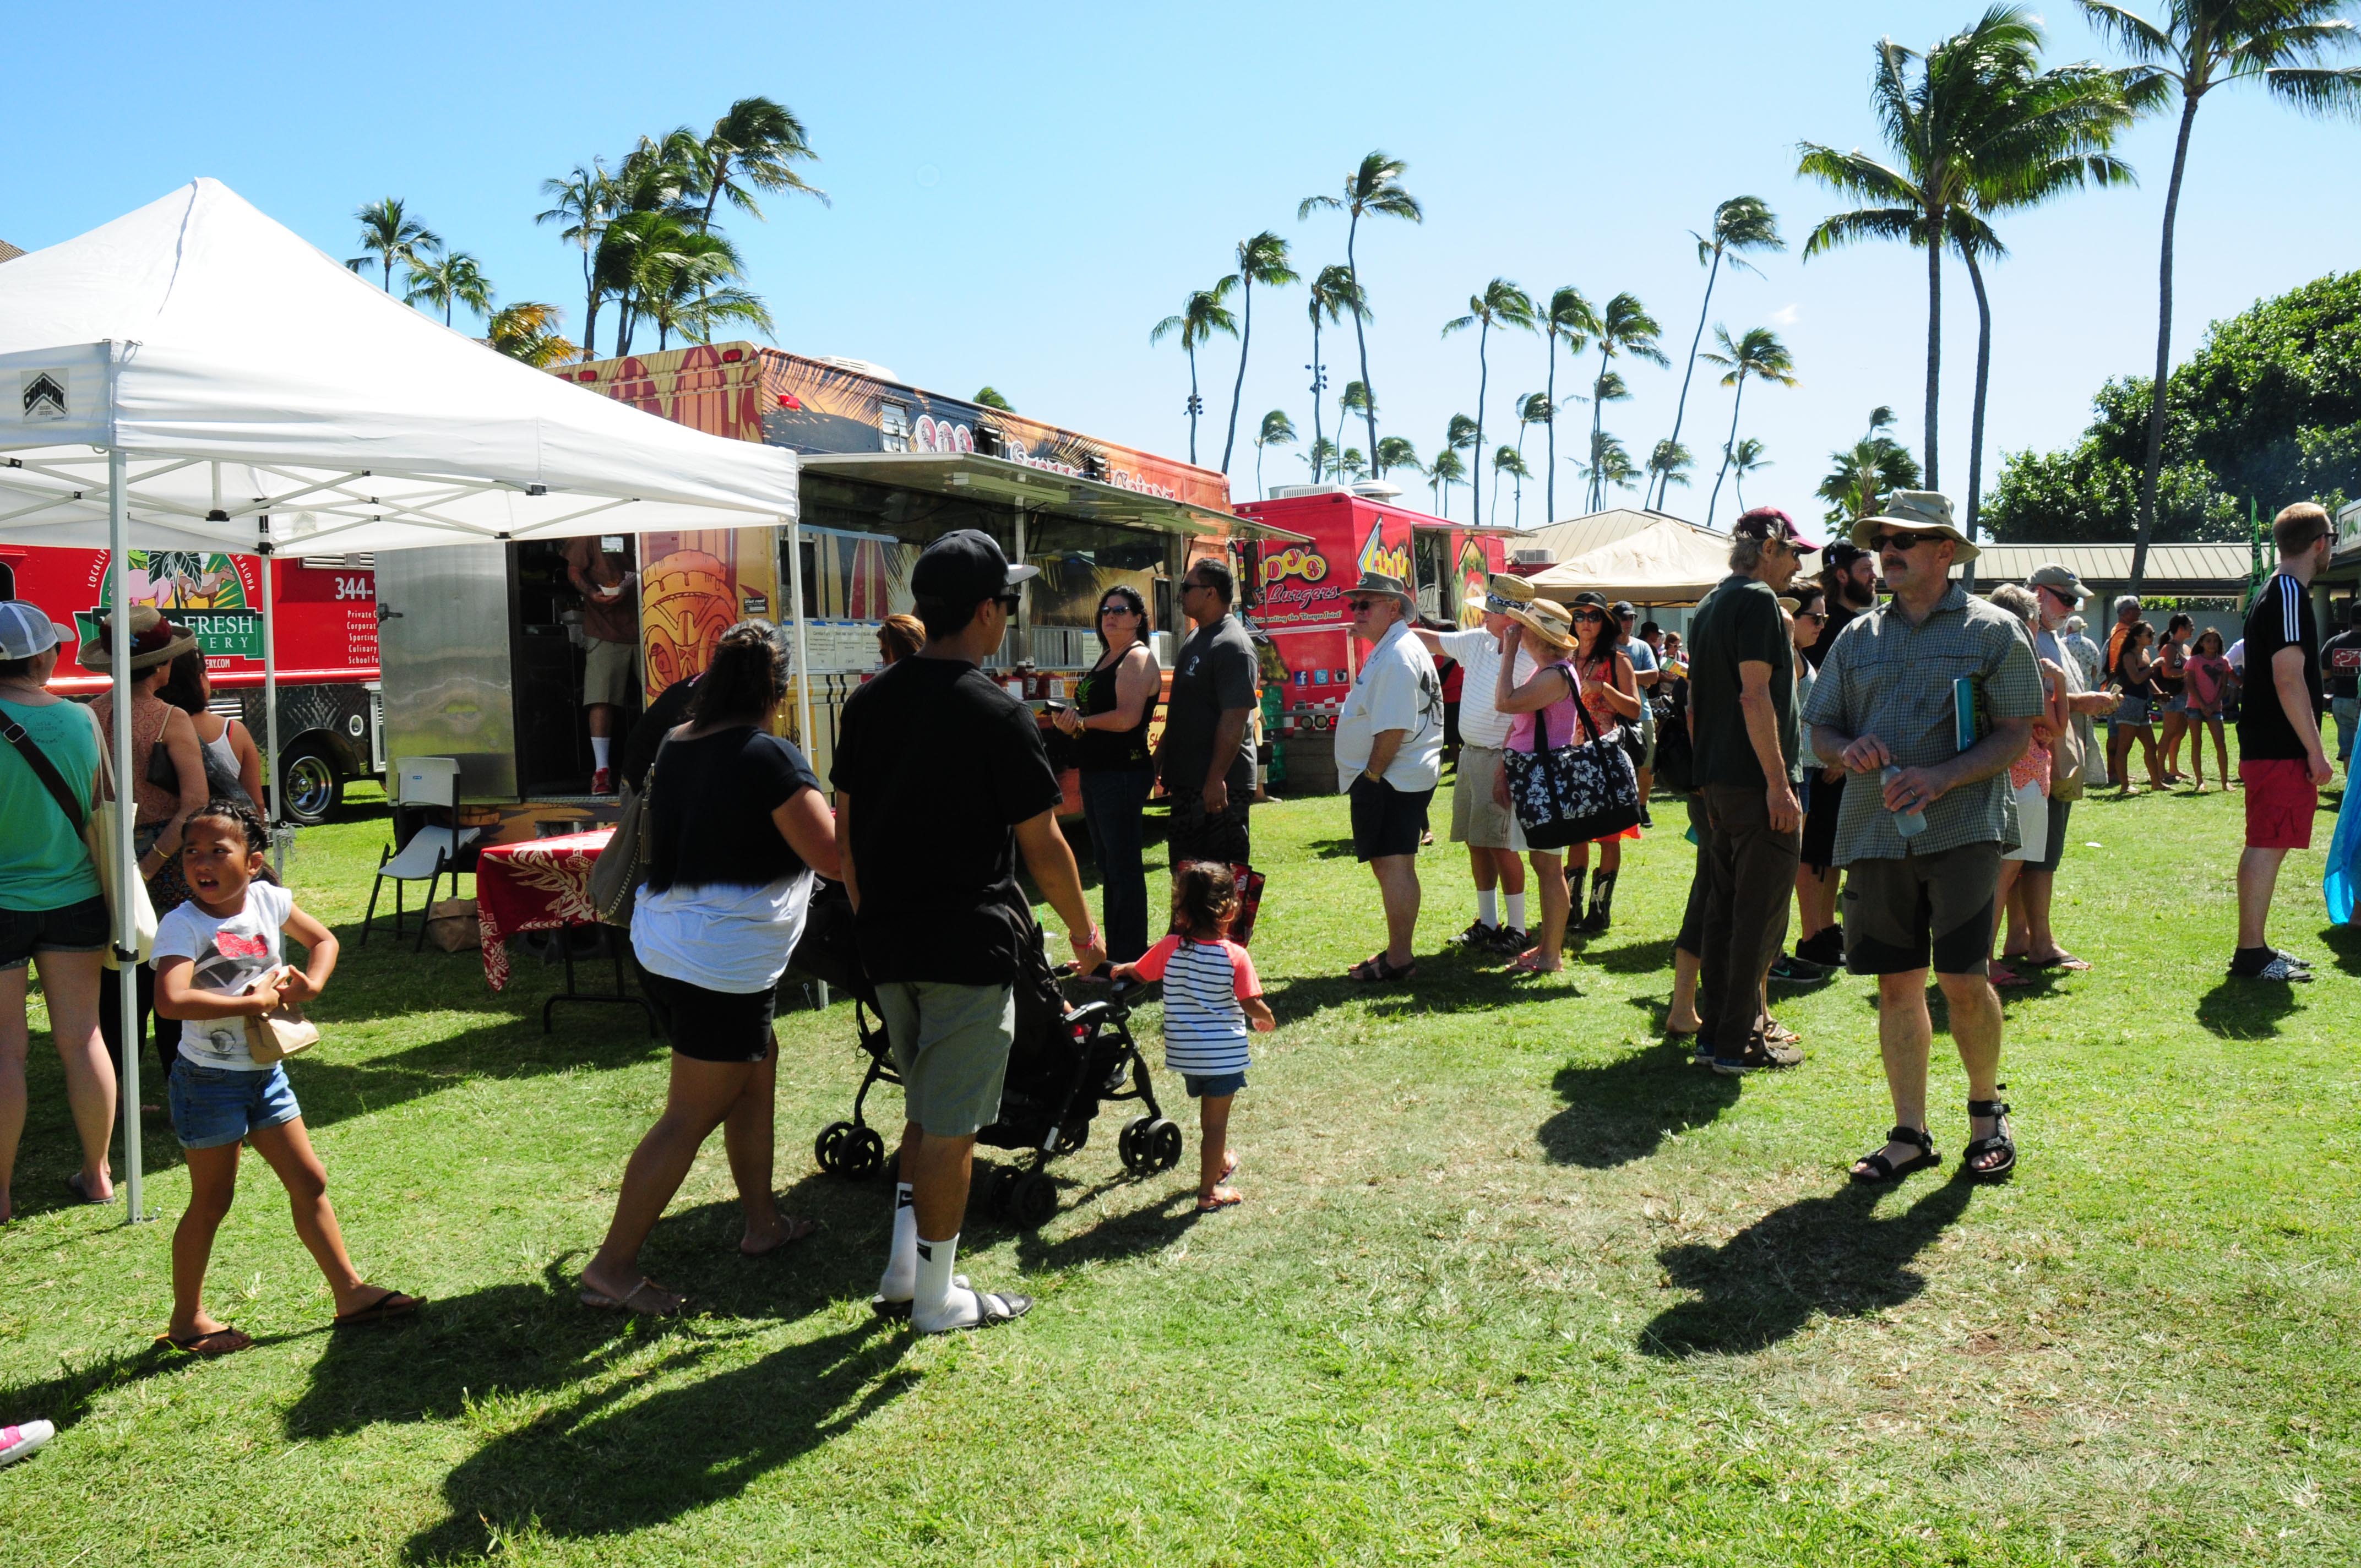 On Saturday, a total of 12 food trucks offered a diverse menu of island cuisine. Photo by Casey Nishikawa